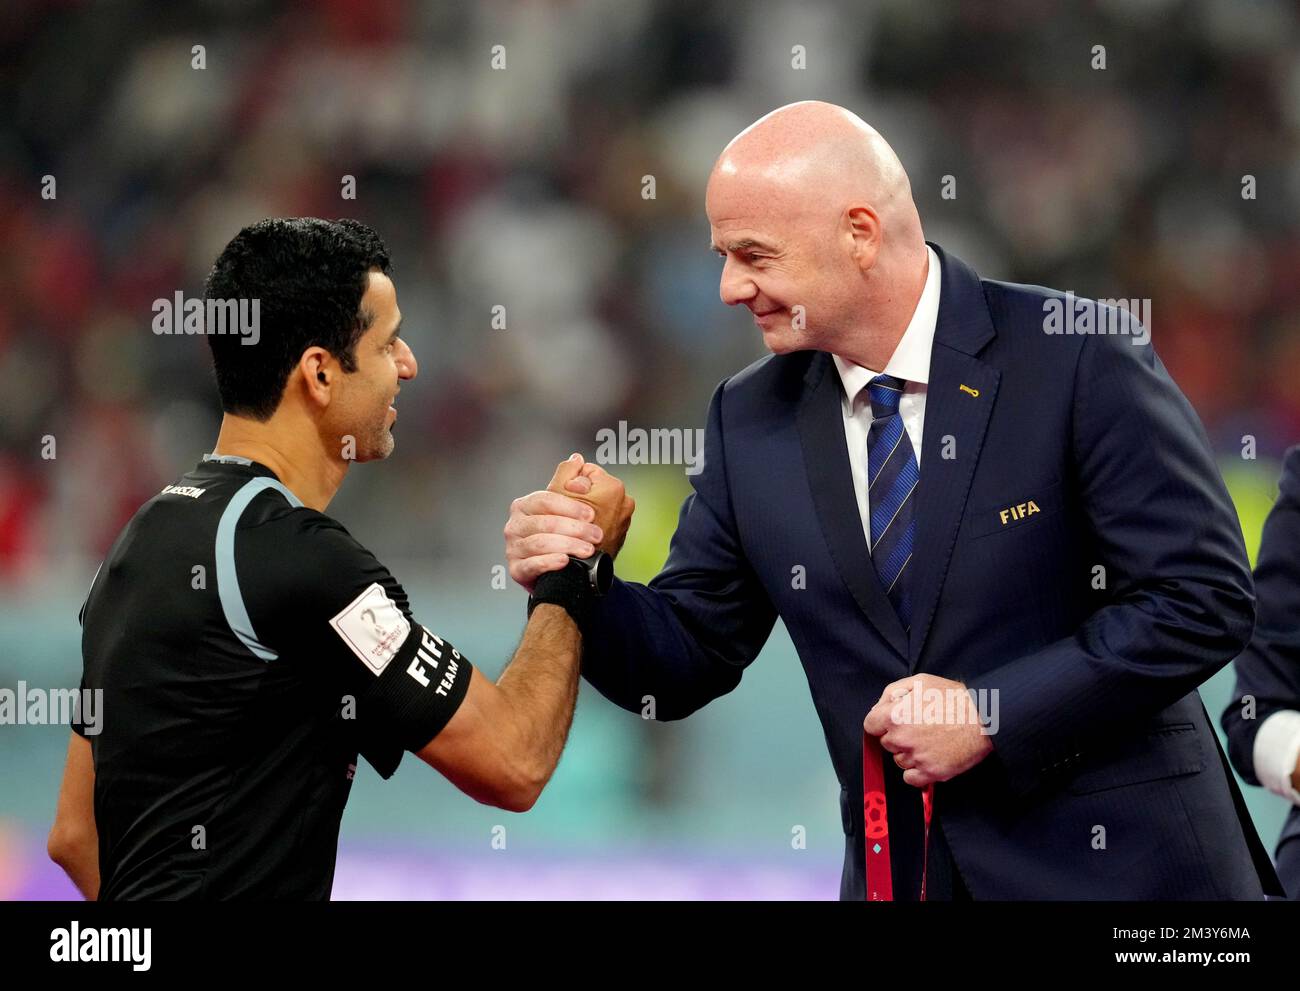 FIFA President Gianni Infantino shakes hands with referee Abdulrahman Al-Jassim as he presents him with a medal at the end of the FIFA World Cup third place play-off match at the Khalifa International Stadium, Doha. Picture date: Saturday December 17, 2022. Stock Photo